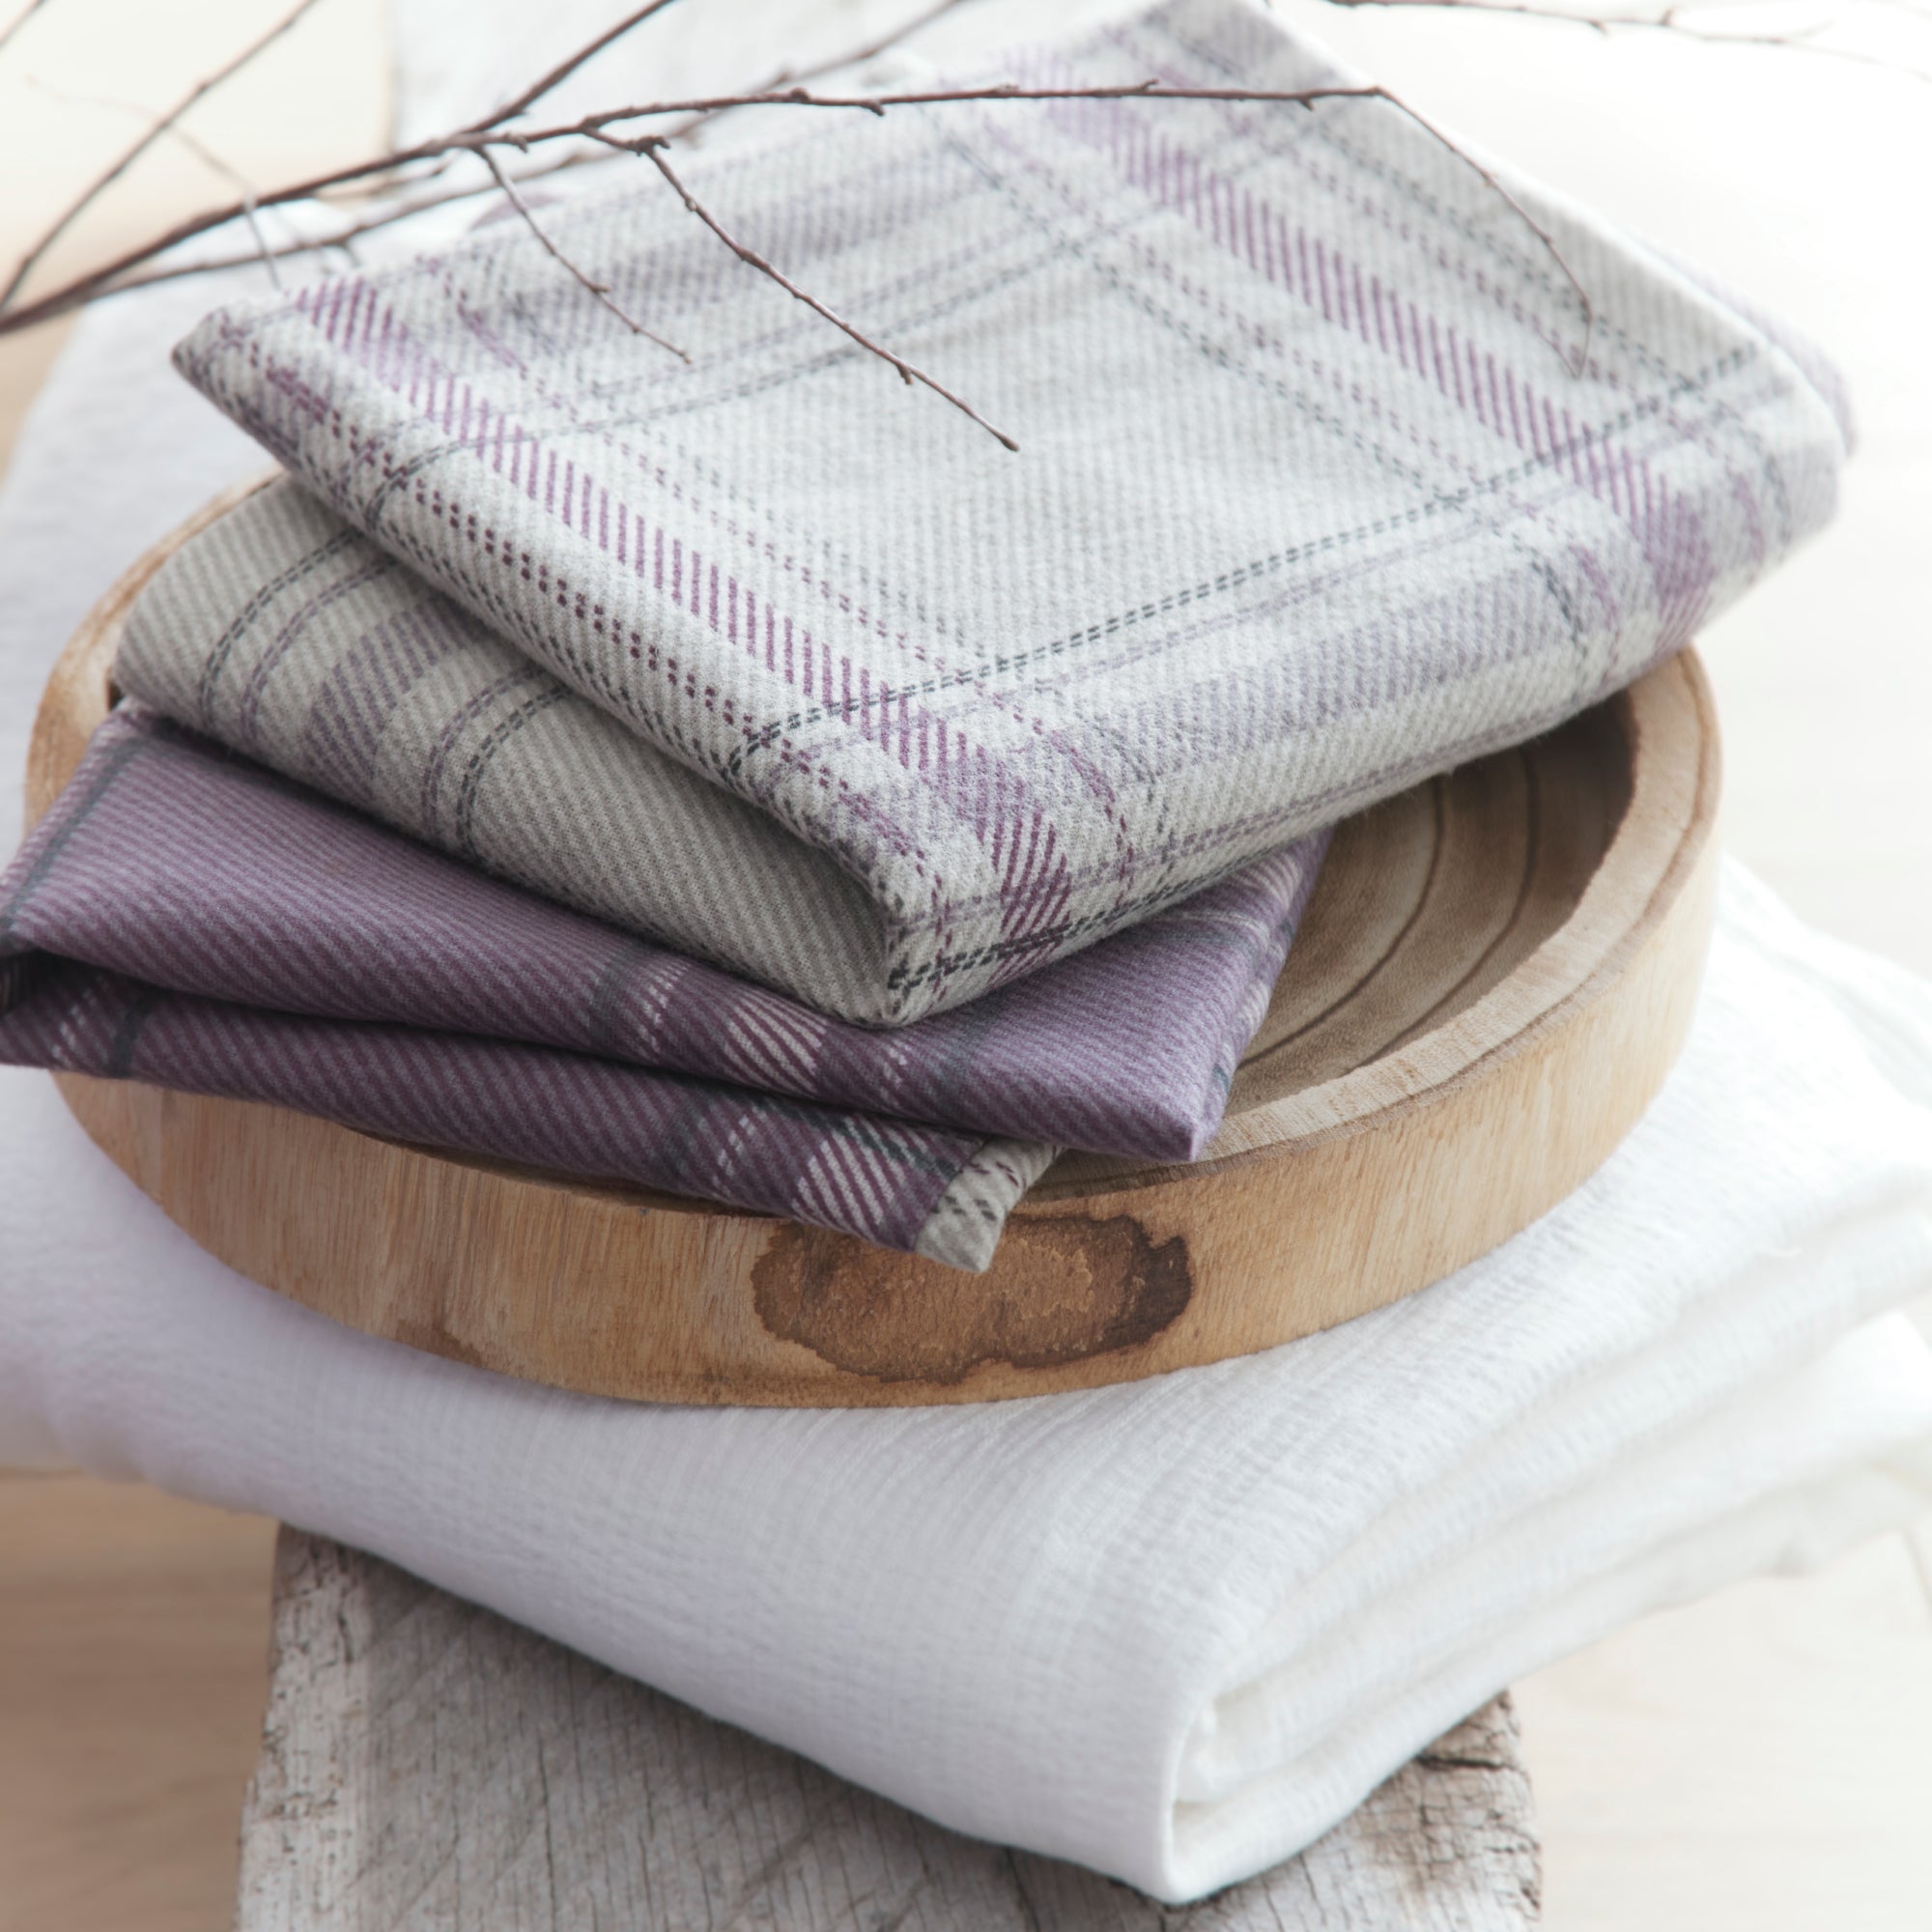 Duvet Cover Set Aviemore Check by Appletree Hygge in Heather